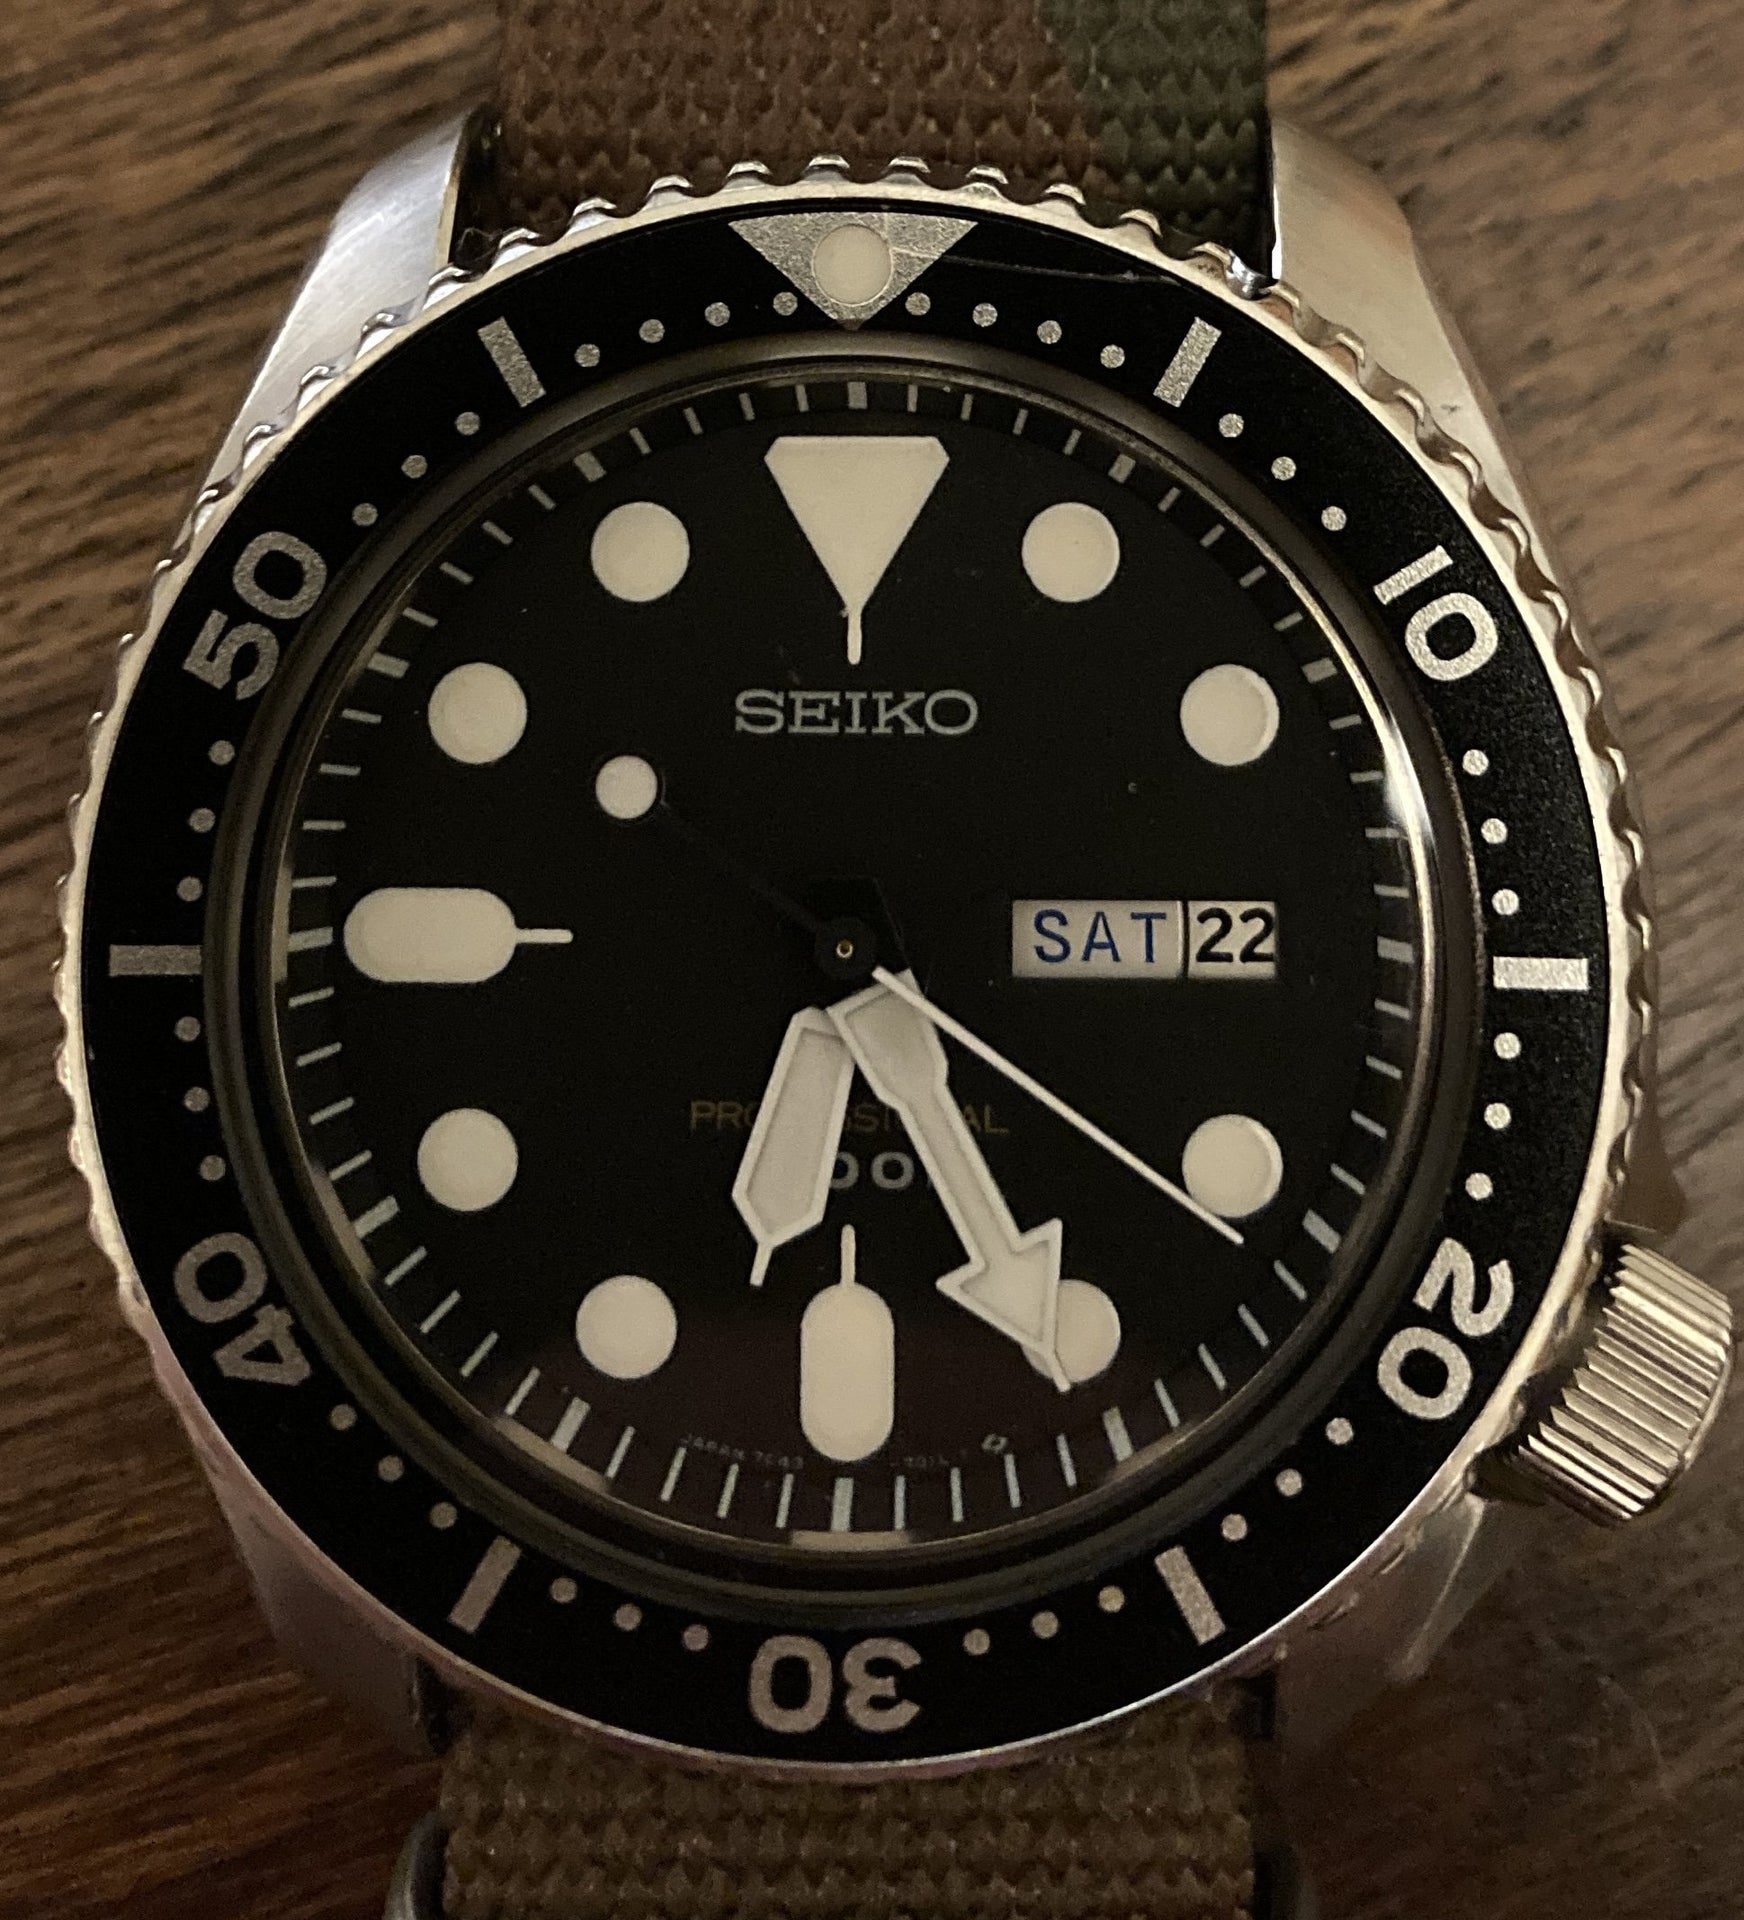 Seiko 7C43 -- Date Window Cropping Date Number (Misaligned? Incorrect Wheel?  Normal?) | The Watch Site